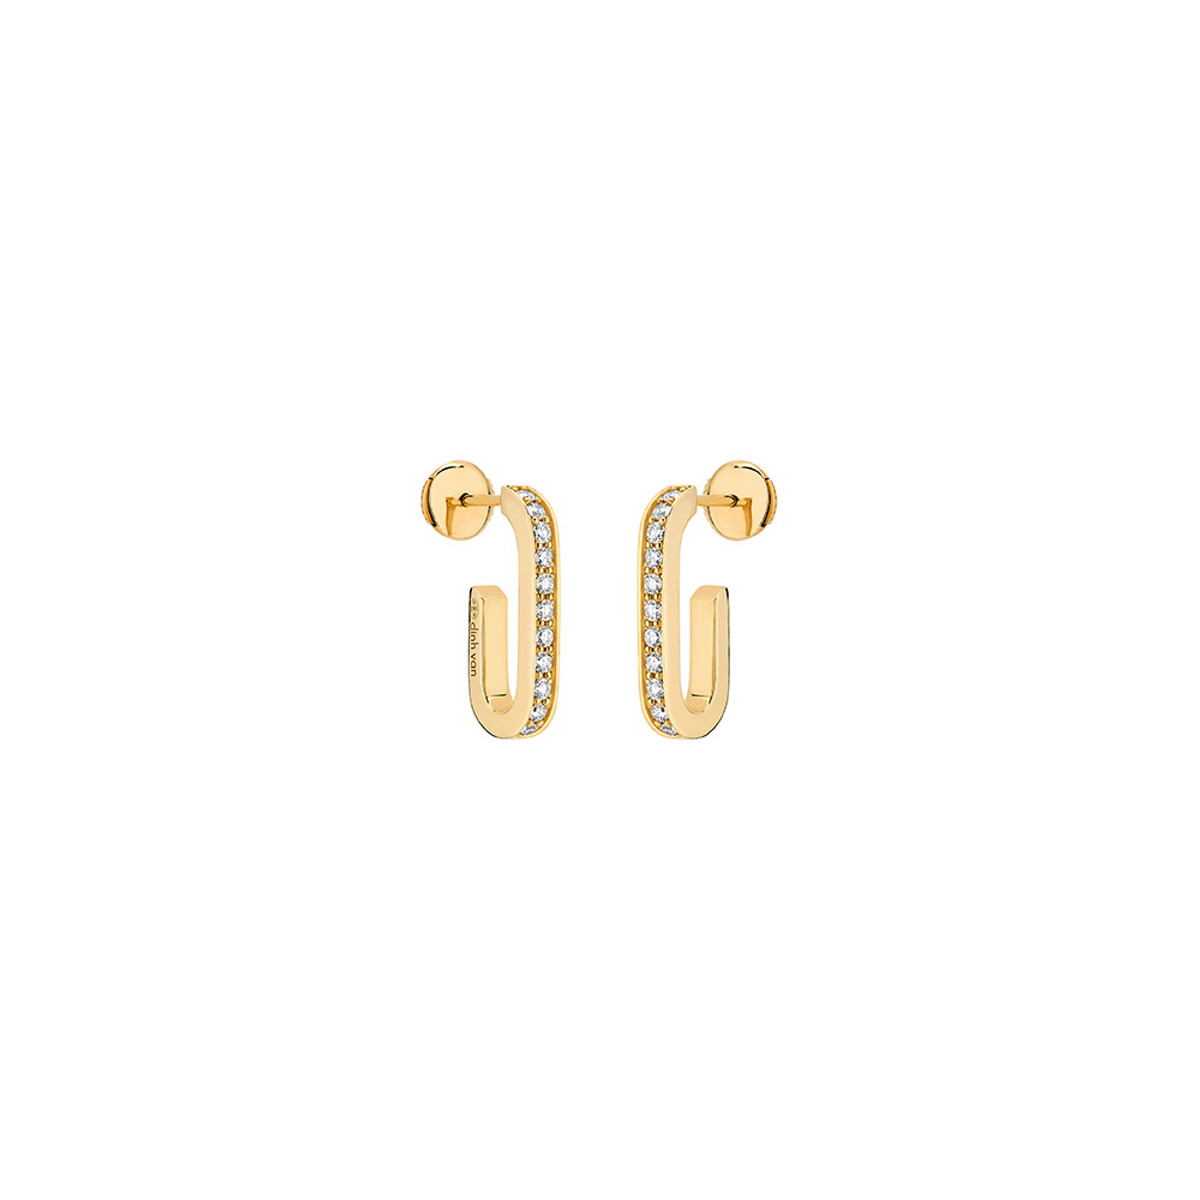 Dinh Van 18K Yellow Gold Maillon L Diamond Earrings-47003 Product Image